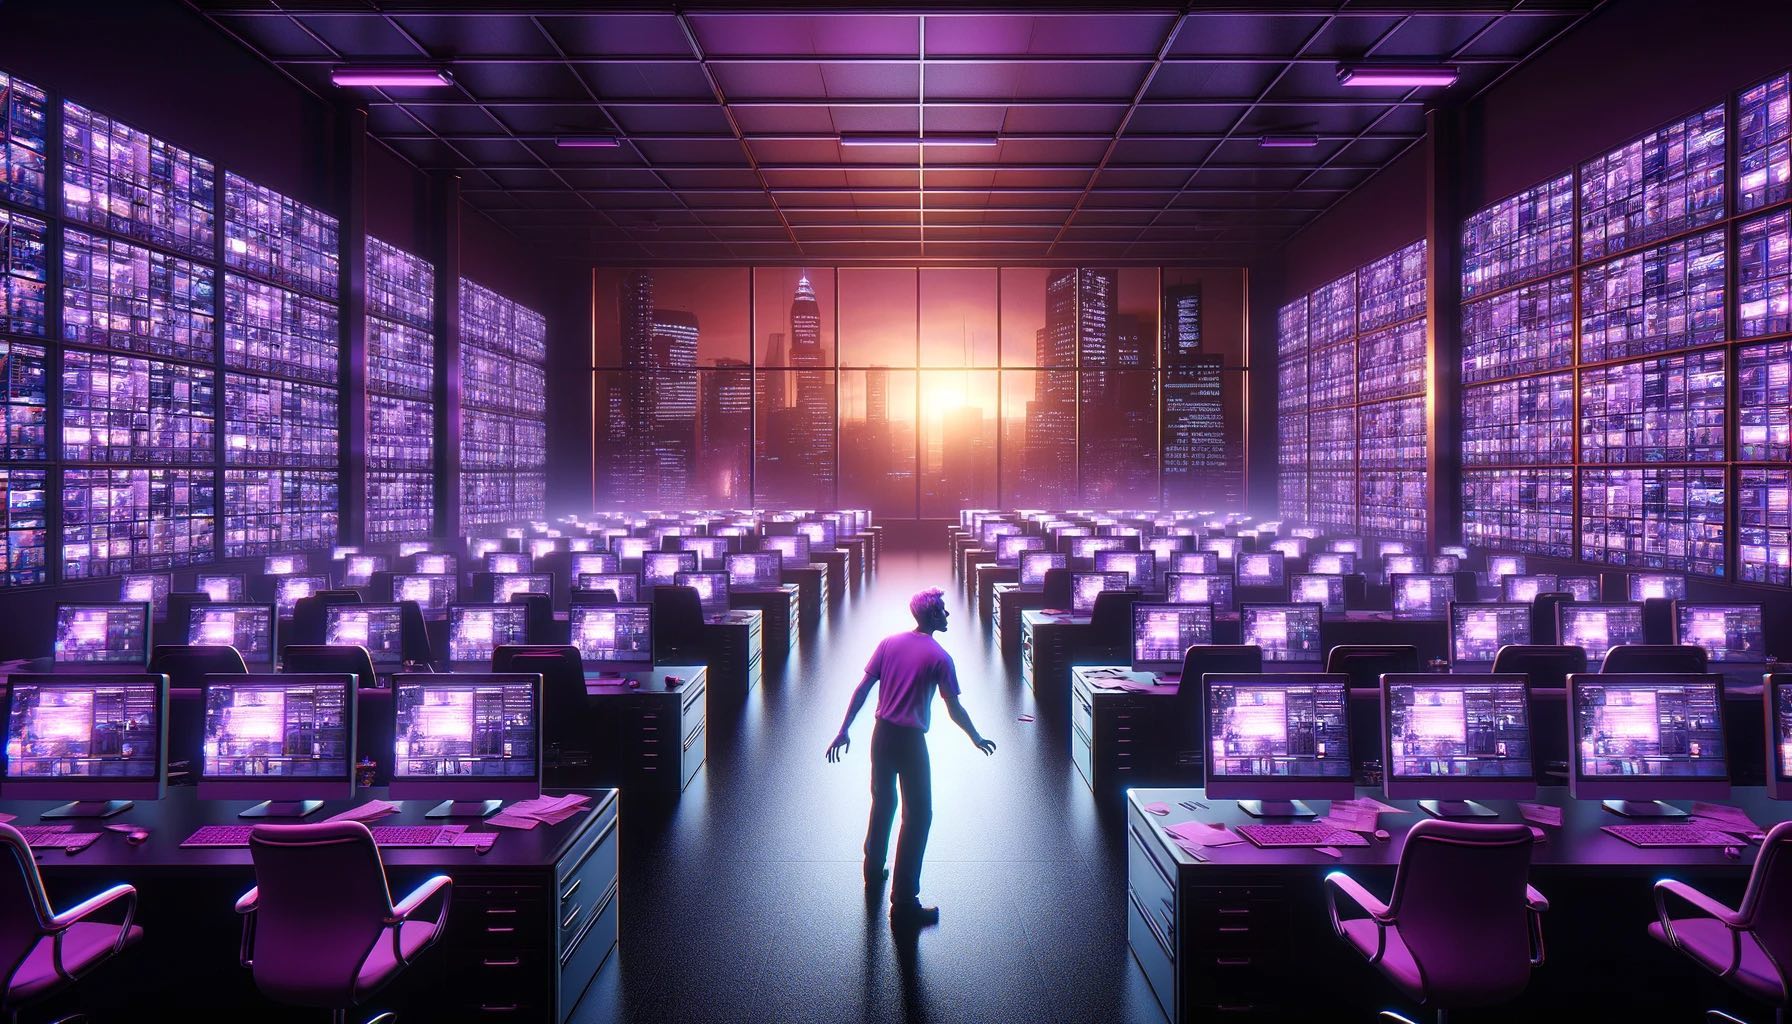 Illustration created with AI-powered tool Dall-E, using the prompt: 'Create a dystopian illustration depicting a dark newsroom with violet-screen computers, a cleaner sweeping the floor, and a sunset with skyscrapers in the background.